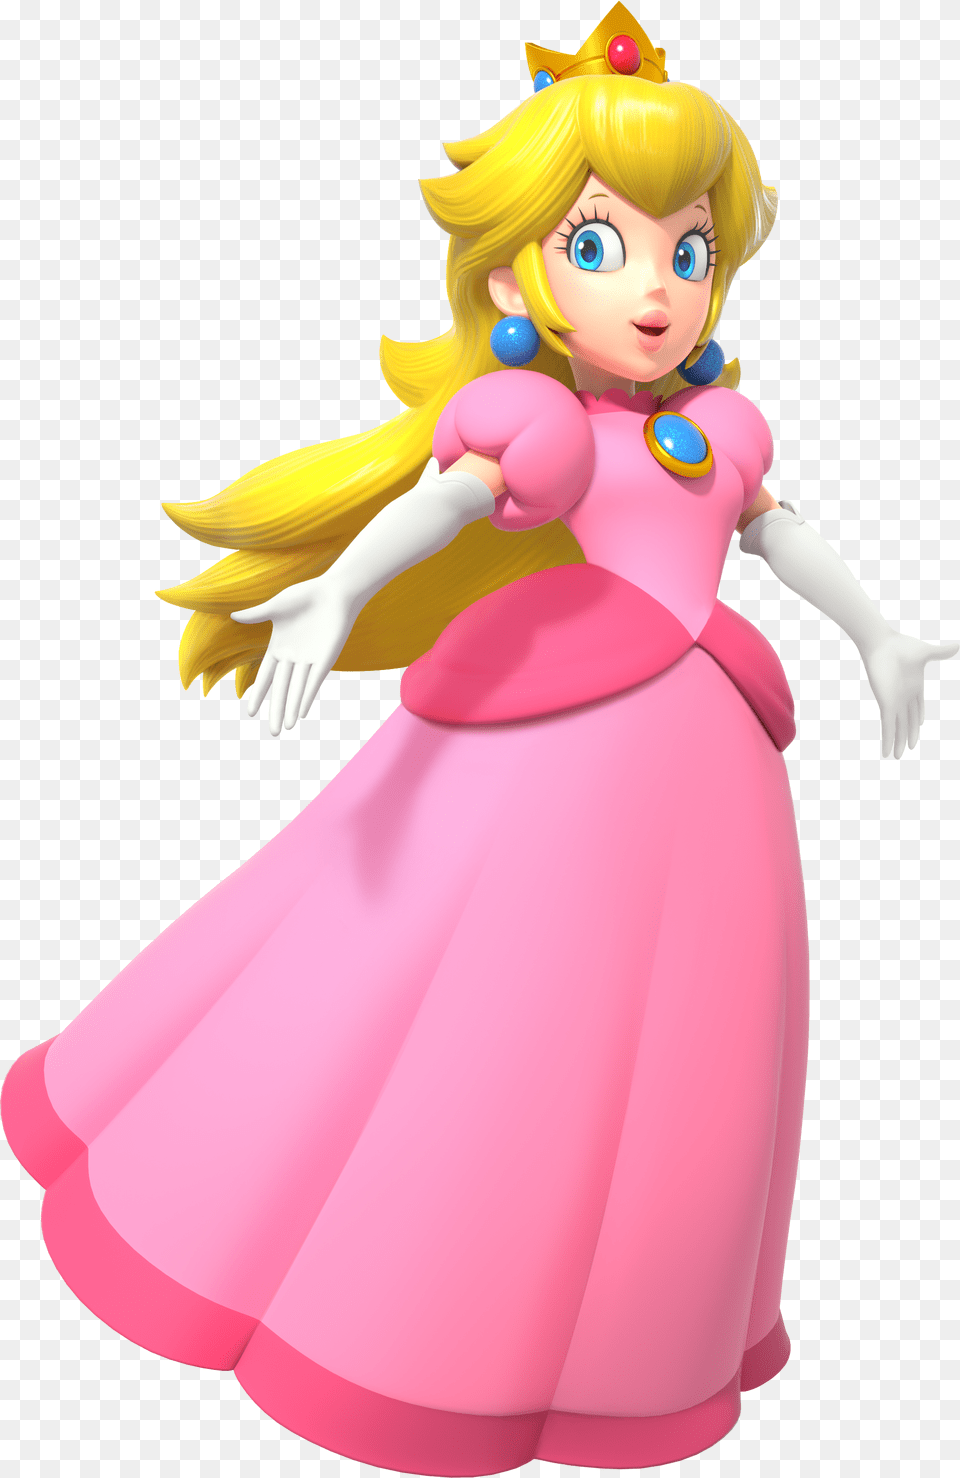 We Are Peach Official Wikia Princess Peach, Doll, Toy, Baby, Person Png